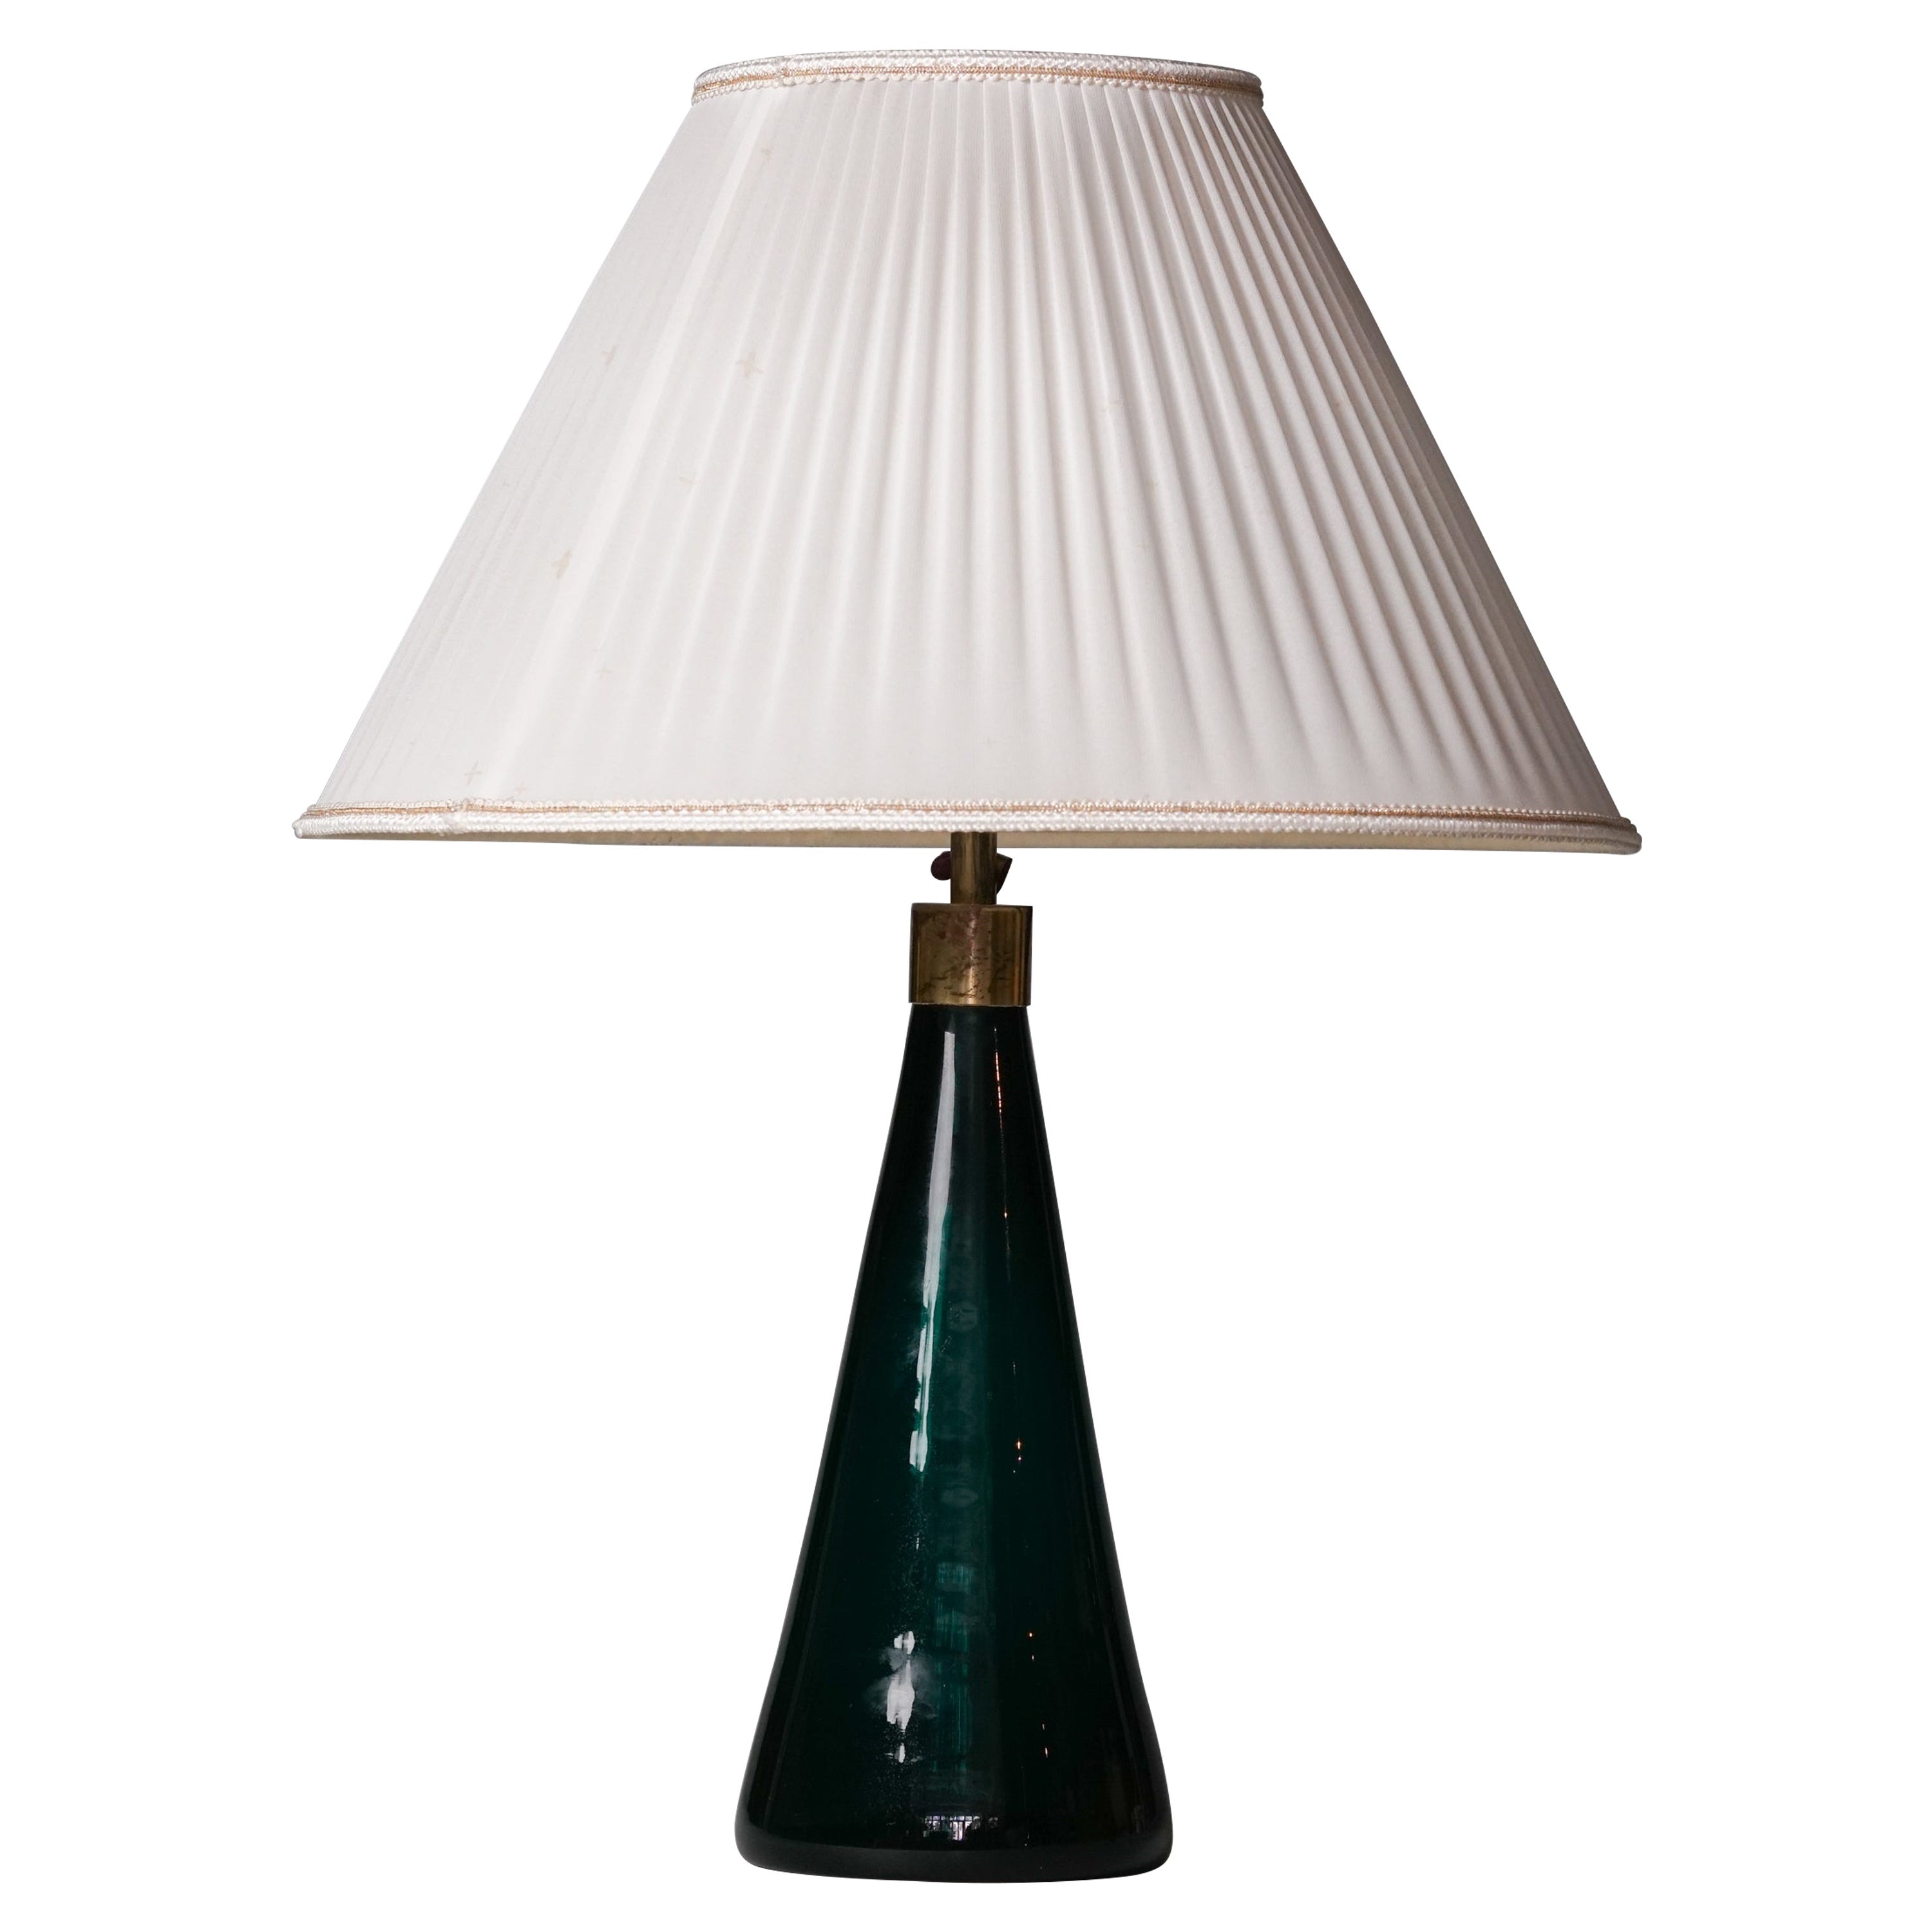 Glass Table Lamp, Gunnel Nyman, Idman Oy, 1940/1950s For Sale